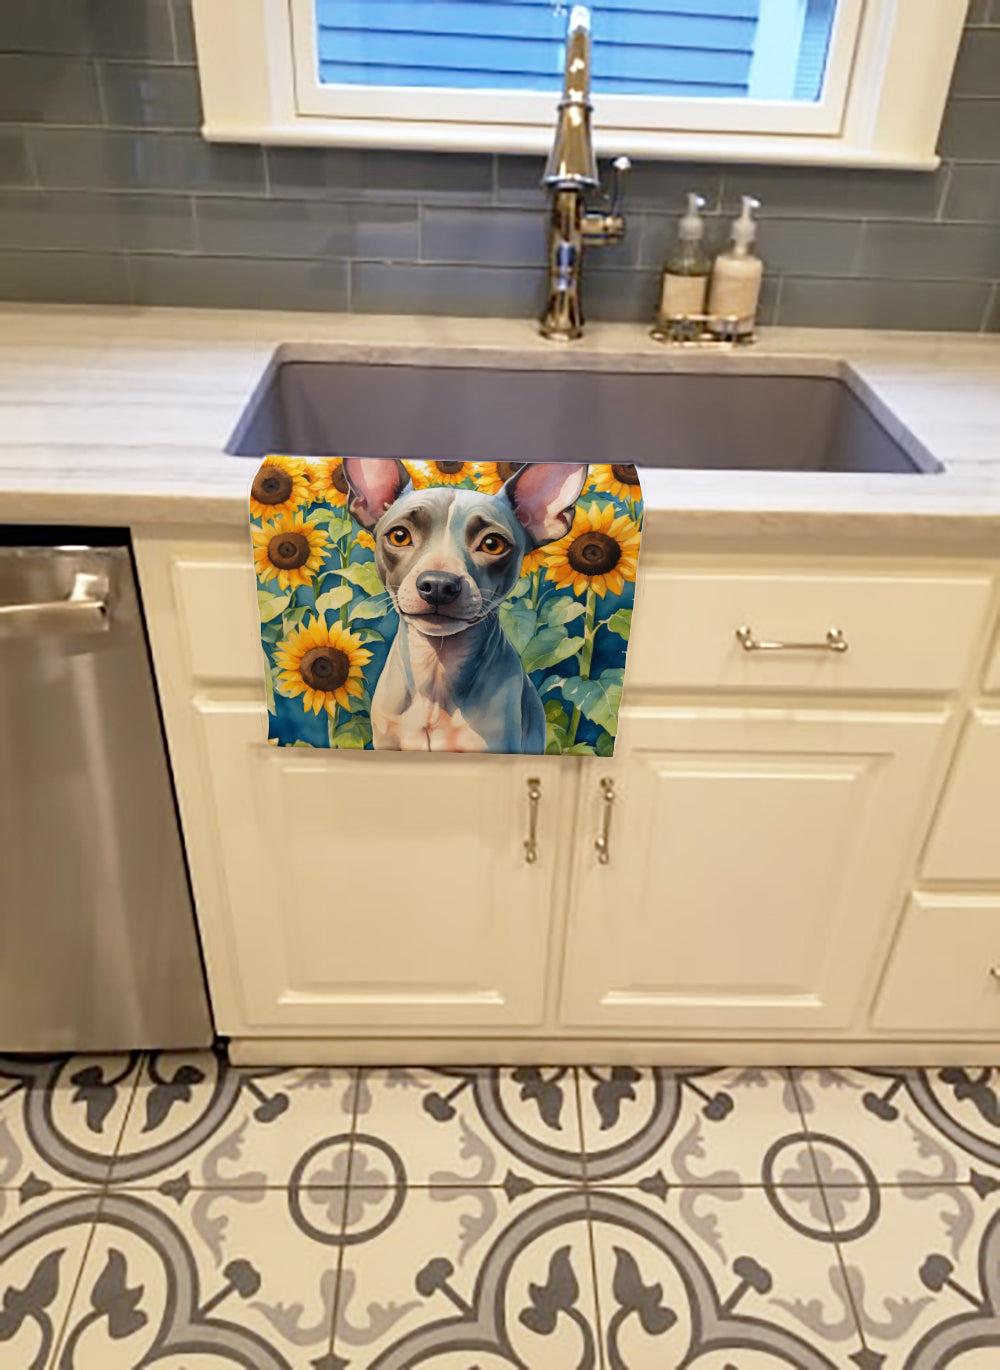 Buy this American Hairless Terrier in Sunflowers Kitchen Towel